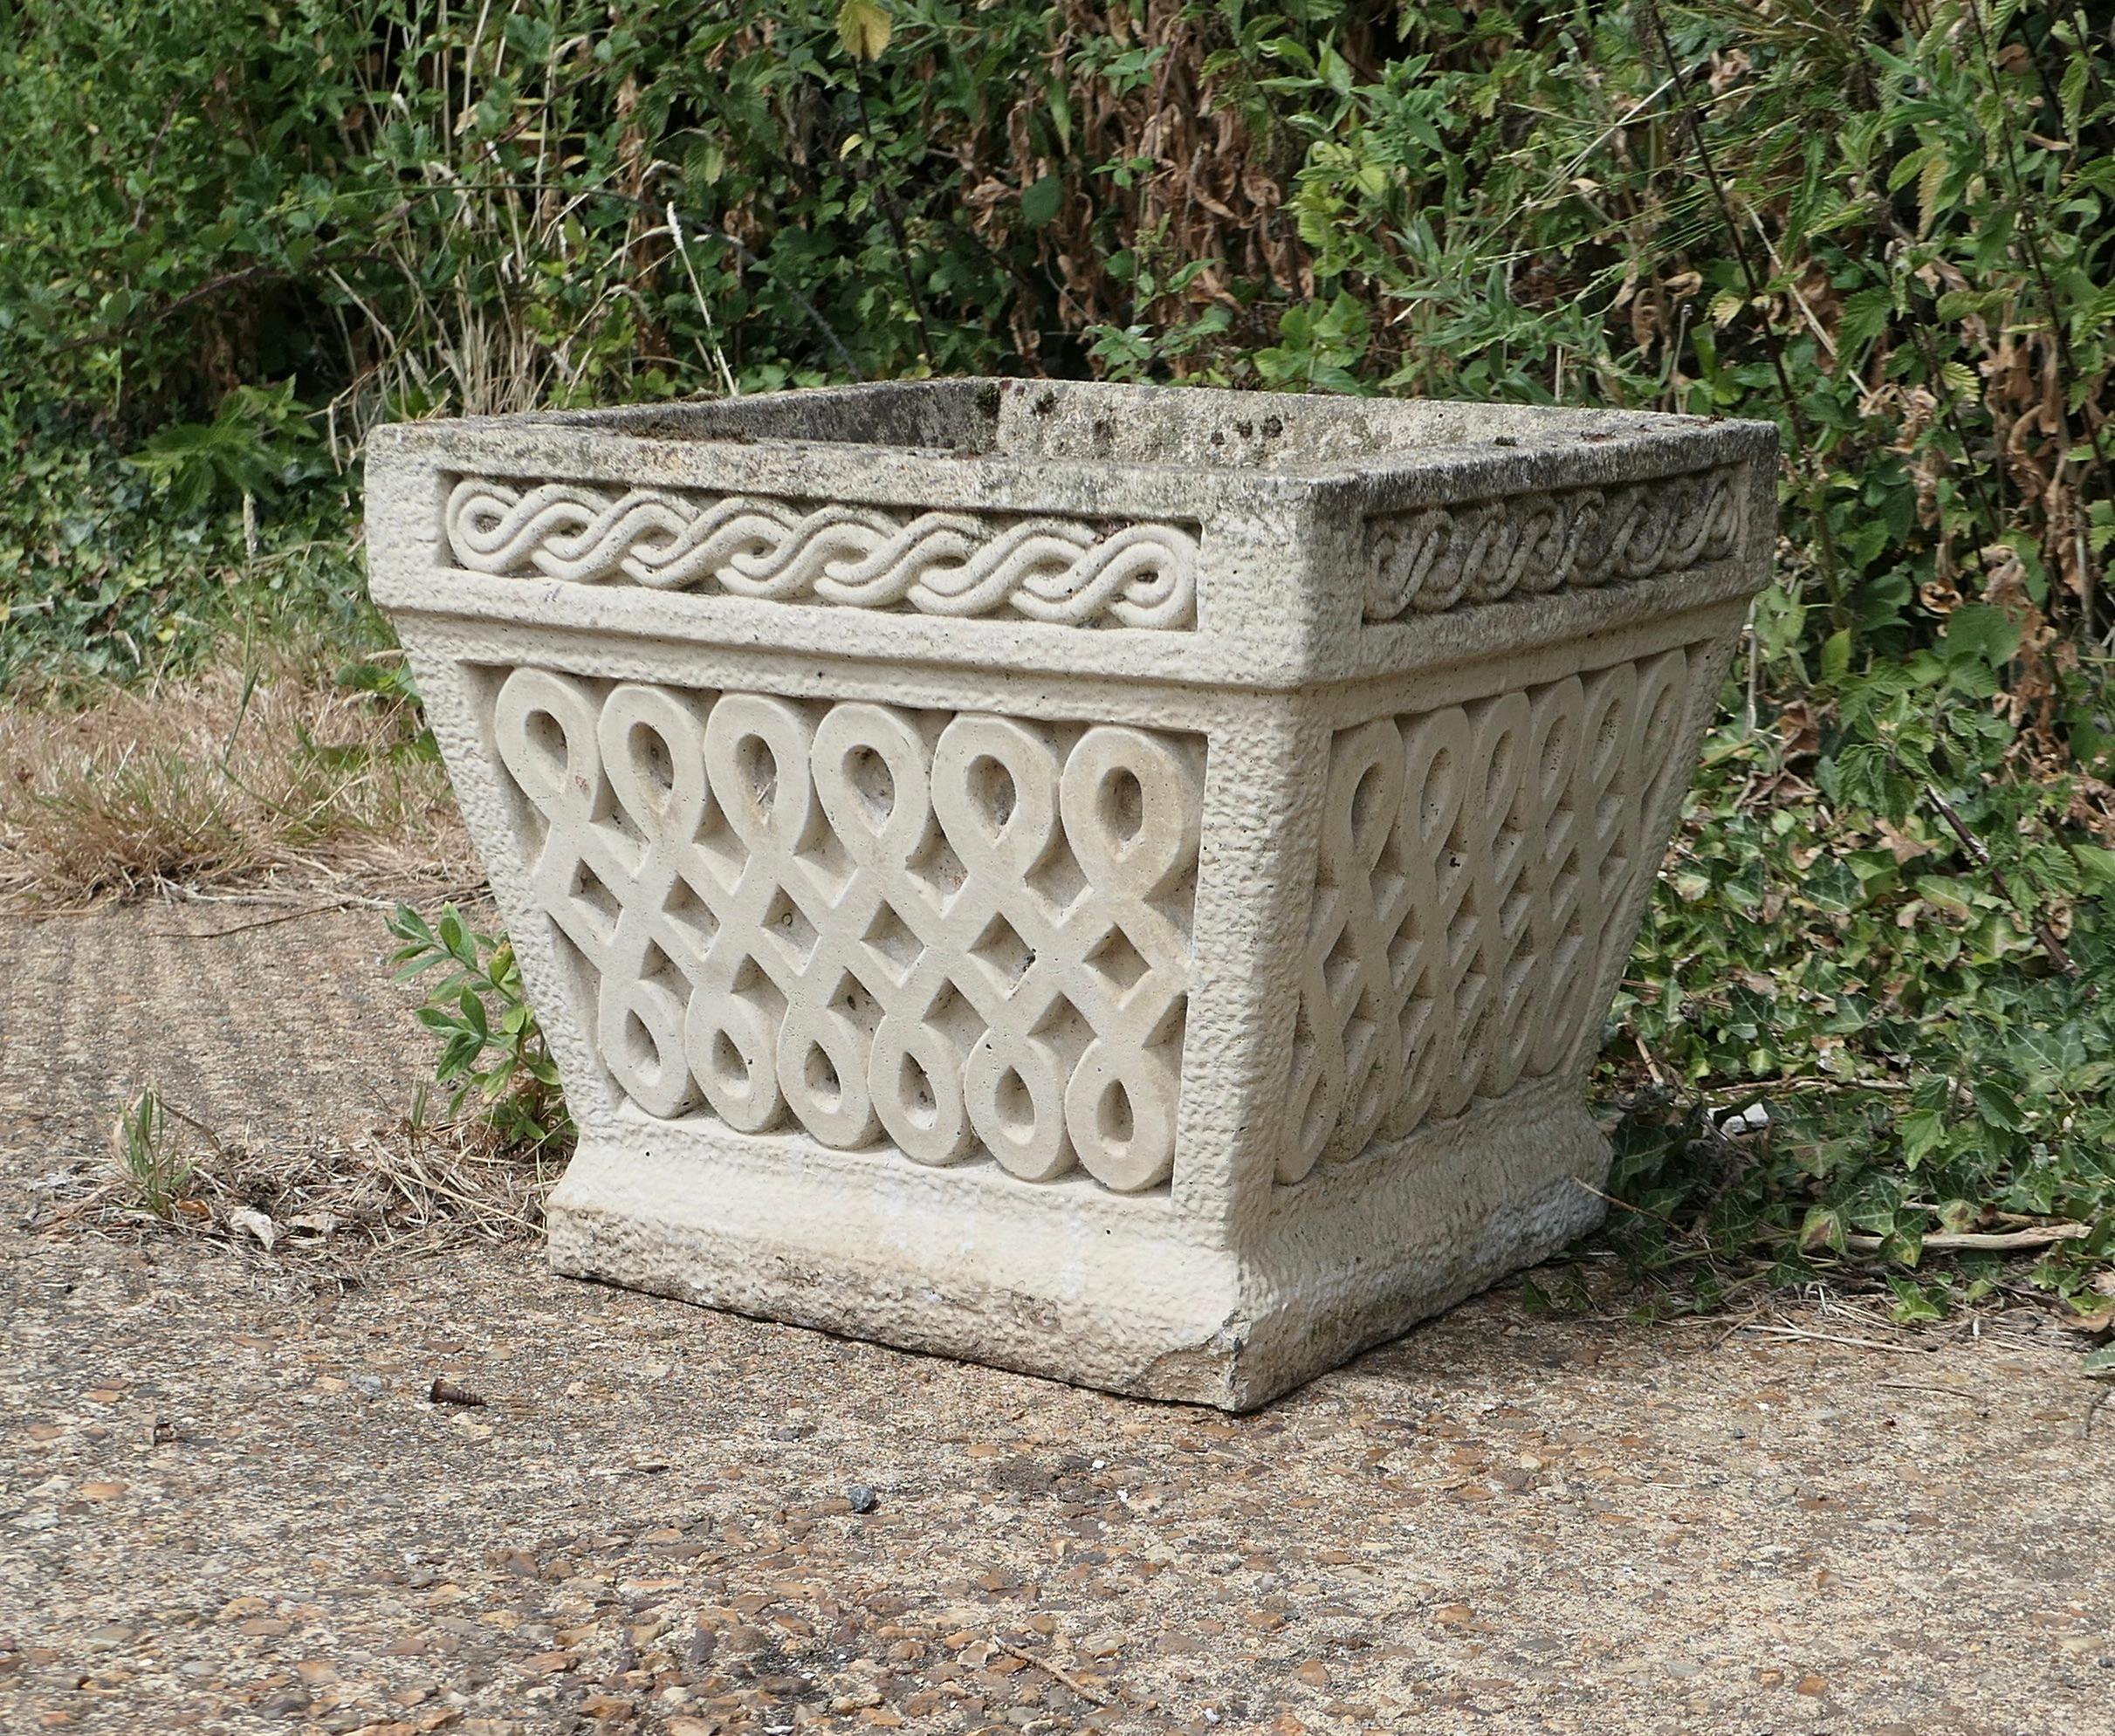 A set of 5 classical basket weave garden planters

An excellent set of 5 large square planters, this superb set came from an outdoor staircase where they were planted and displayed along one side
They are decorated in the Celtic style of the